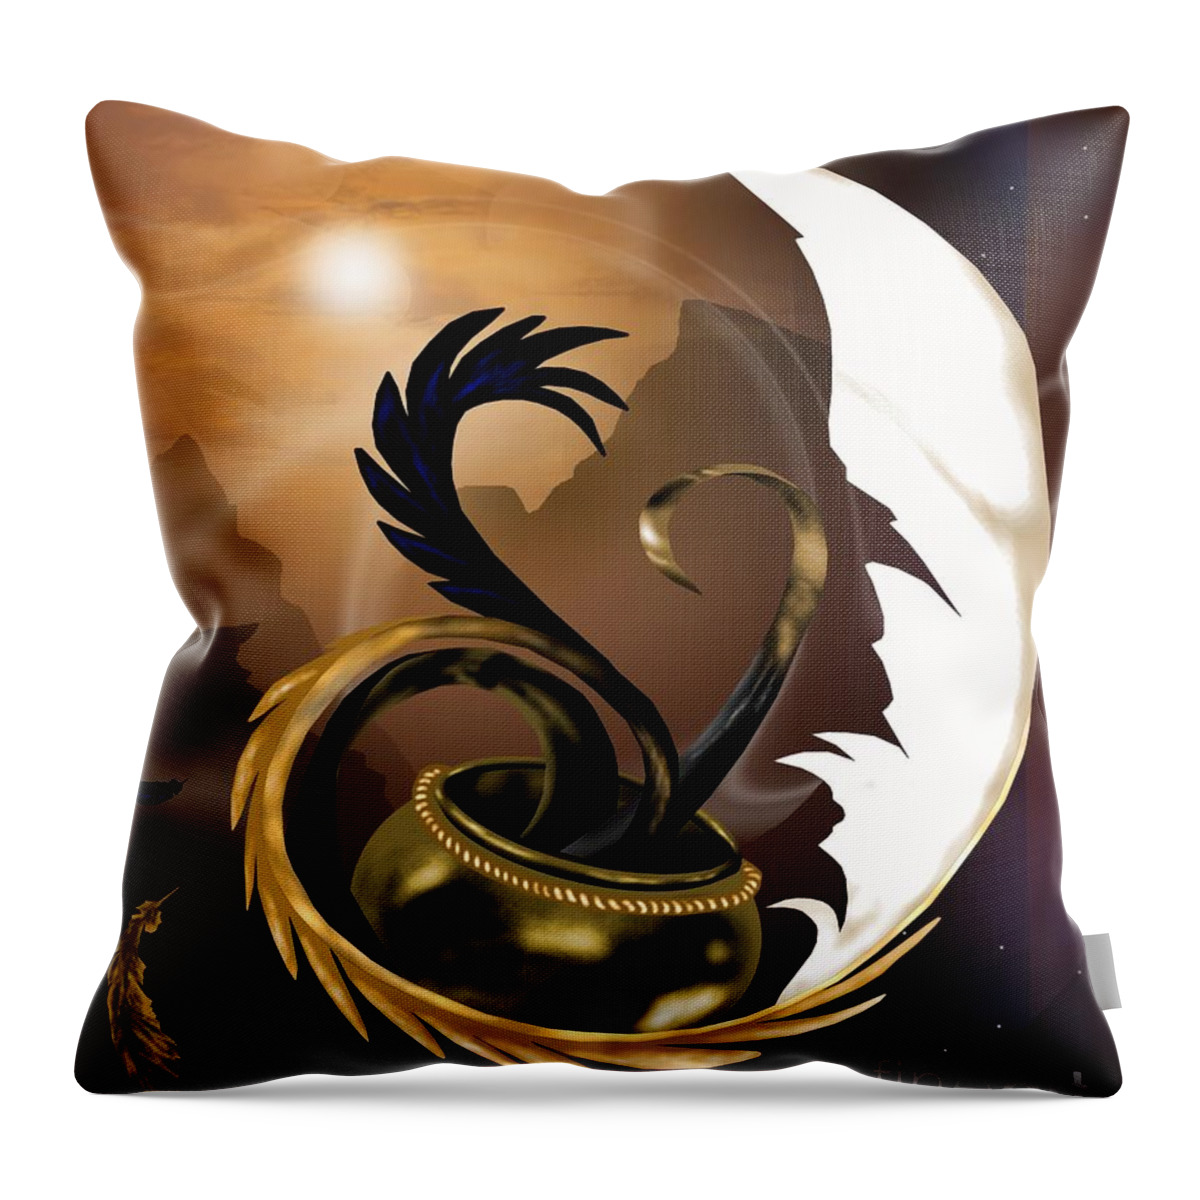 Quill Throw Pillow featuring the digital art An Artist's Calling by Alice Chen